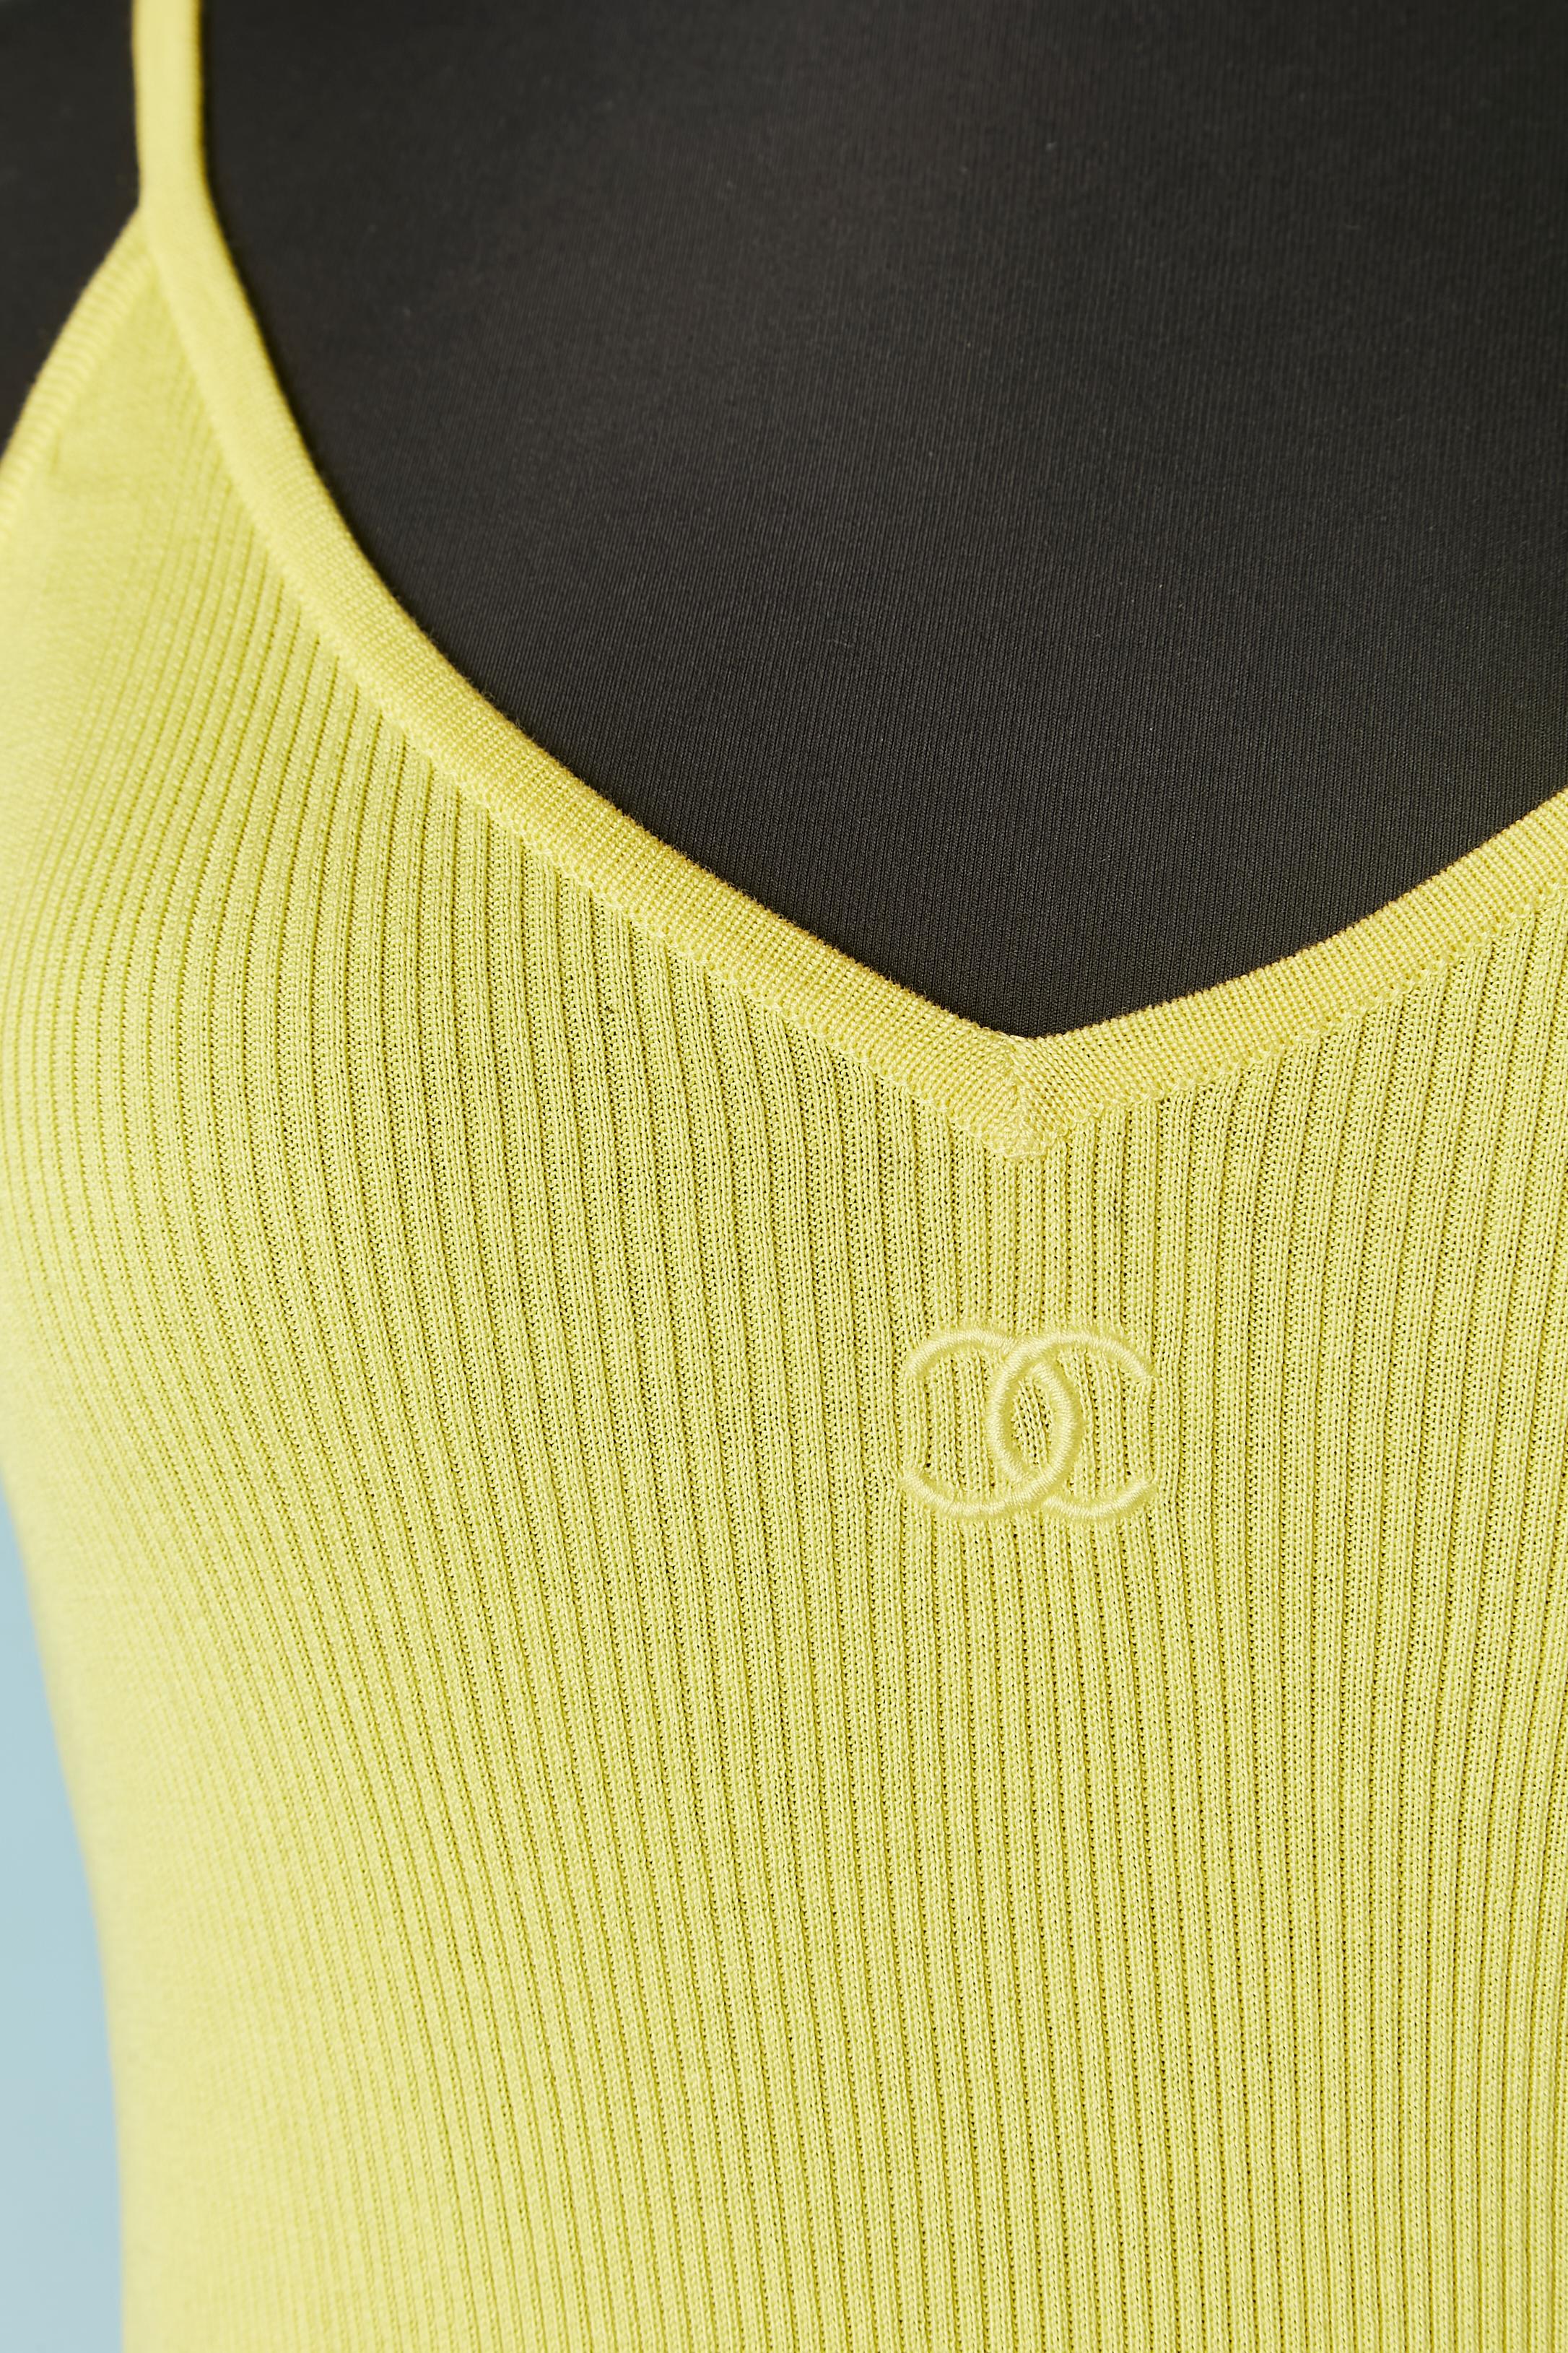 Yellow cotton knit tank-top with tread embroidery brand in the front. 
SIZE 42 (Fr) on tag but fit more likely S 